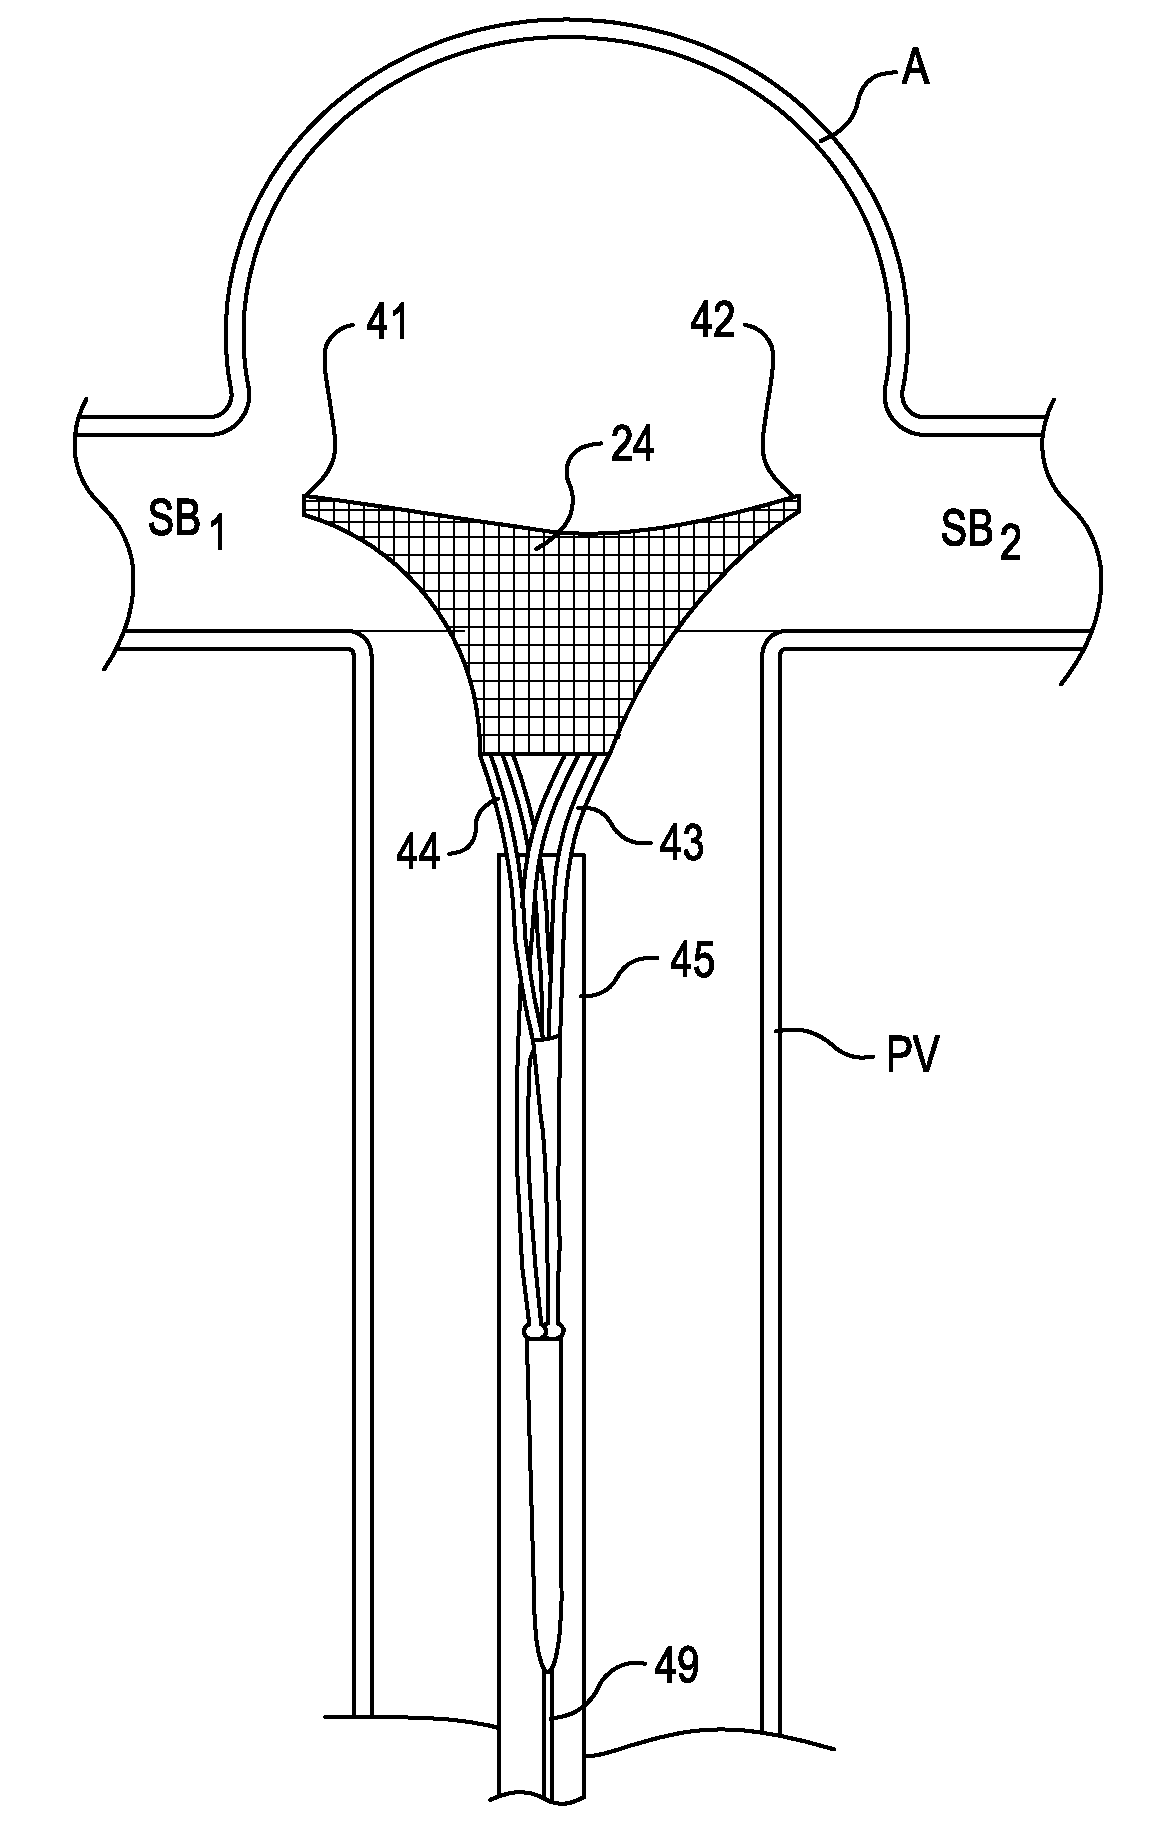 Systems and methods for supporting or occluding a physiological opening or cavity